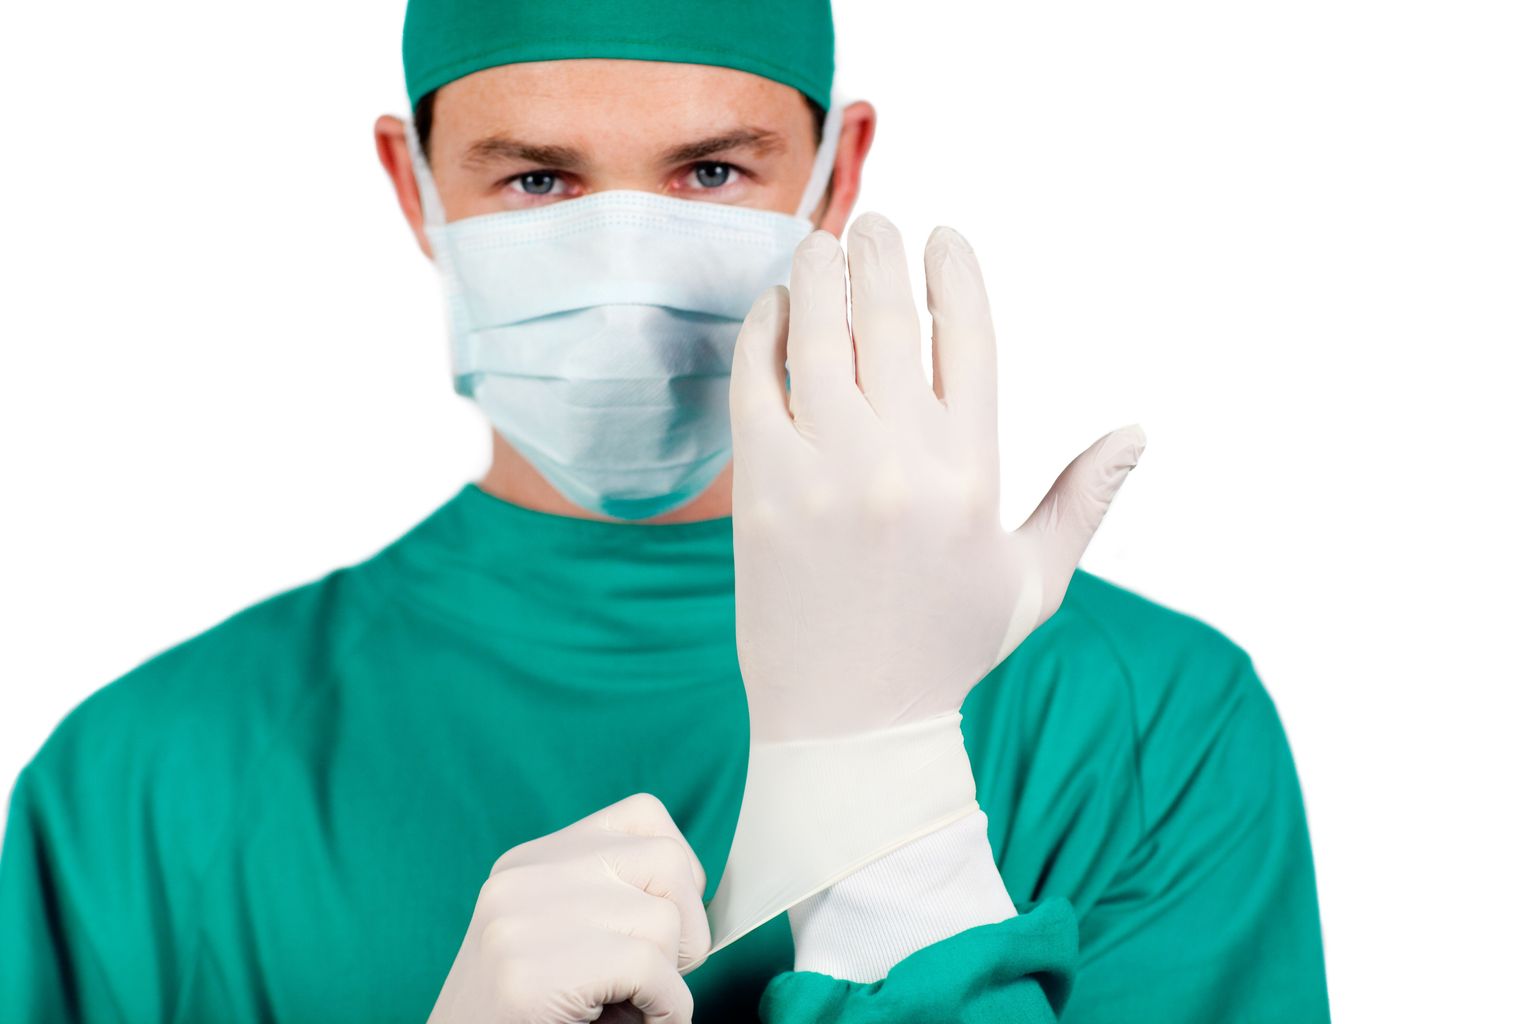 Gothic wife surgical gloves part best adult free images